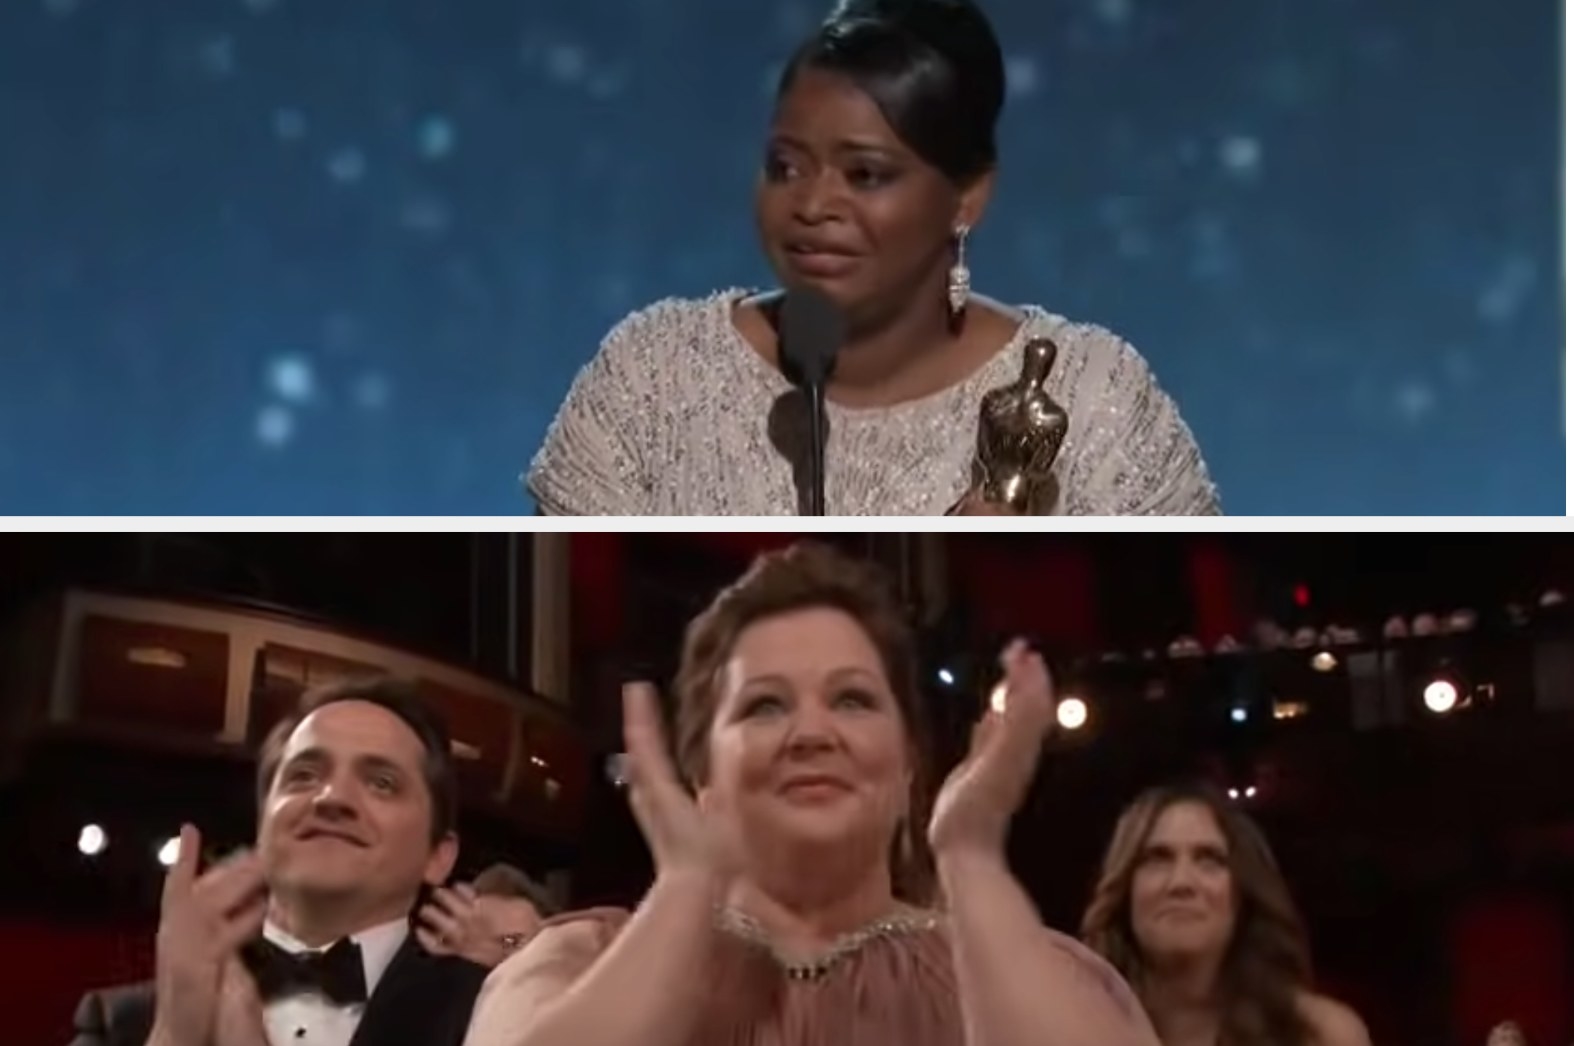 Octavia Spencer accepting the Oscar for Best Supporting Actress in 2012 and Melissa McCarthy clapping for her